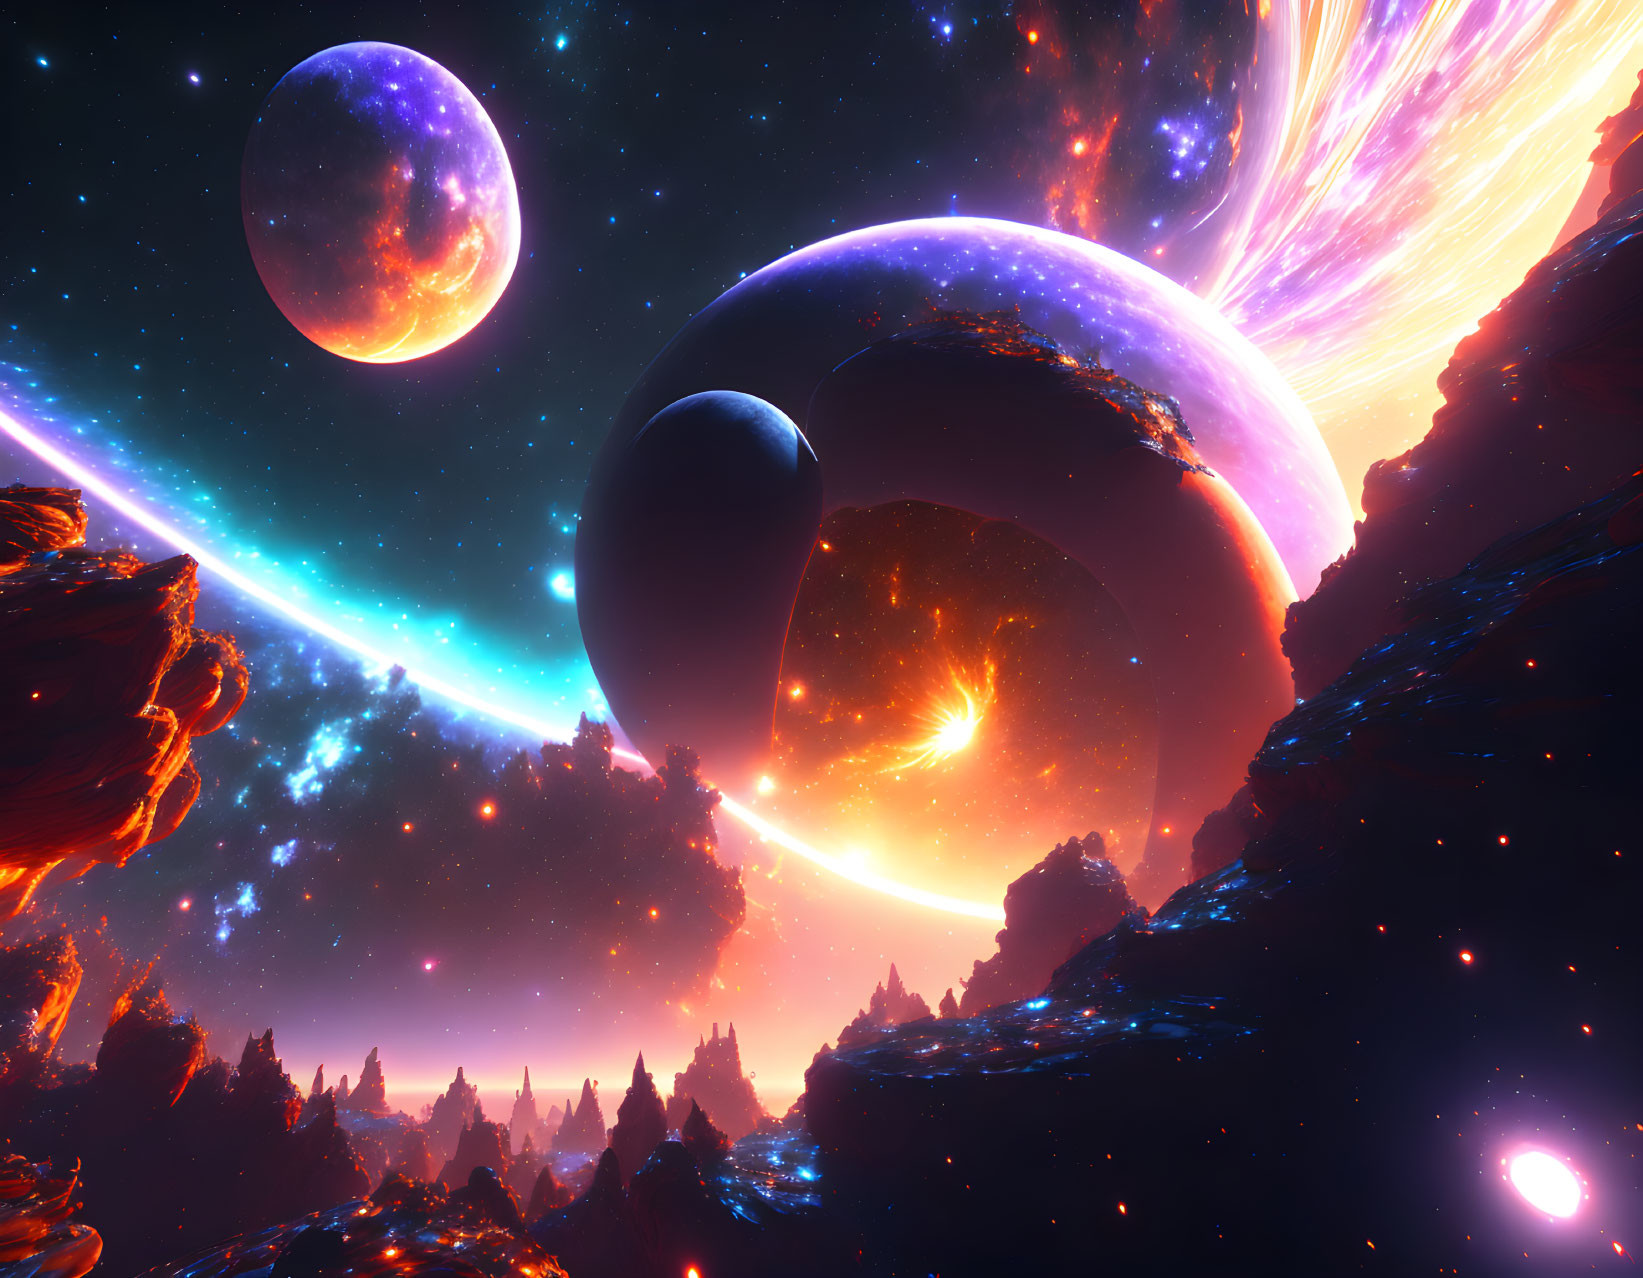 Colorful cosmic landscape with glowing planets and nebulae